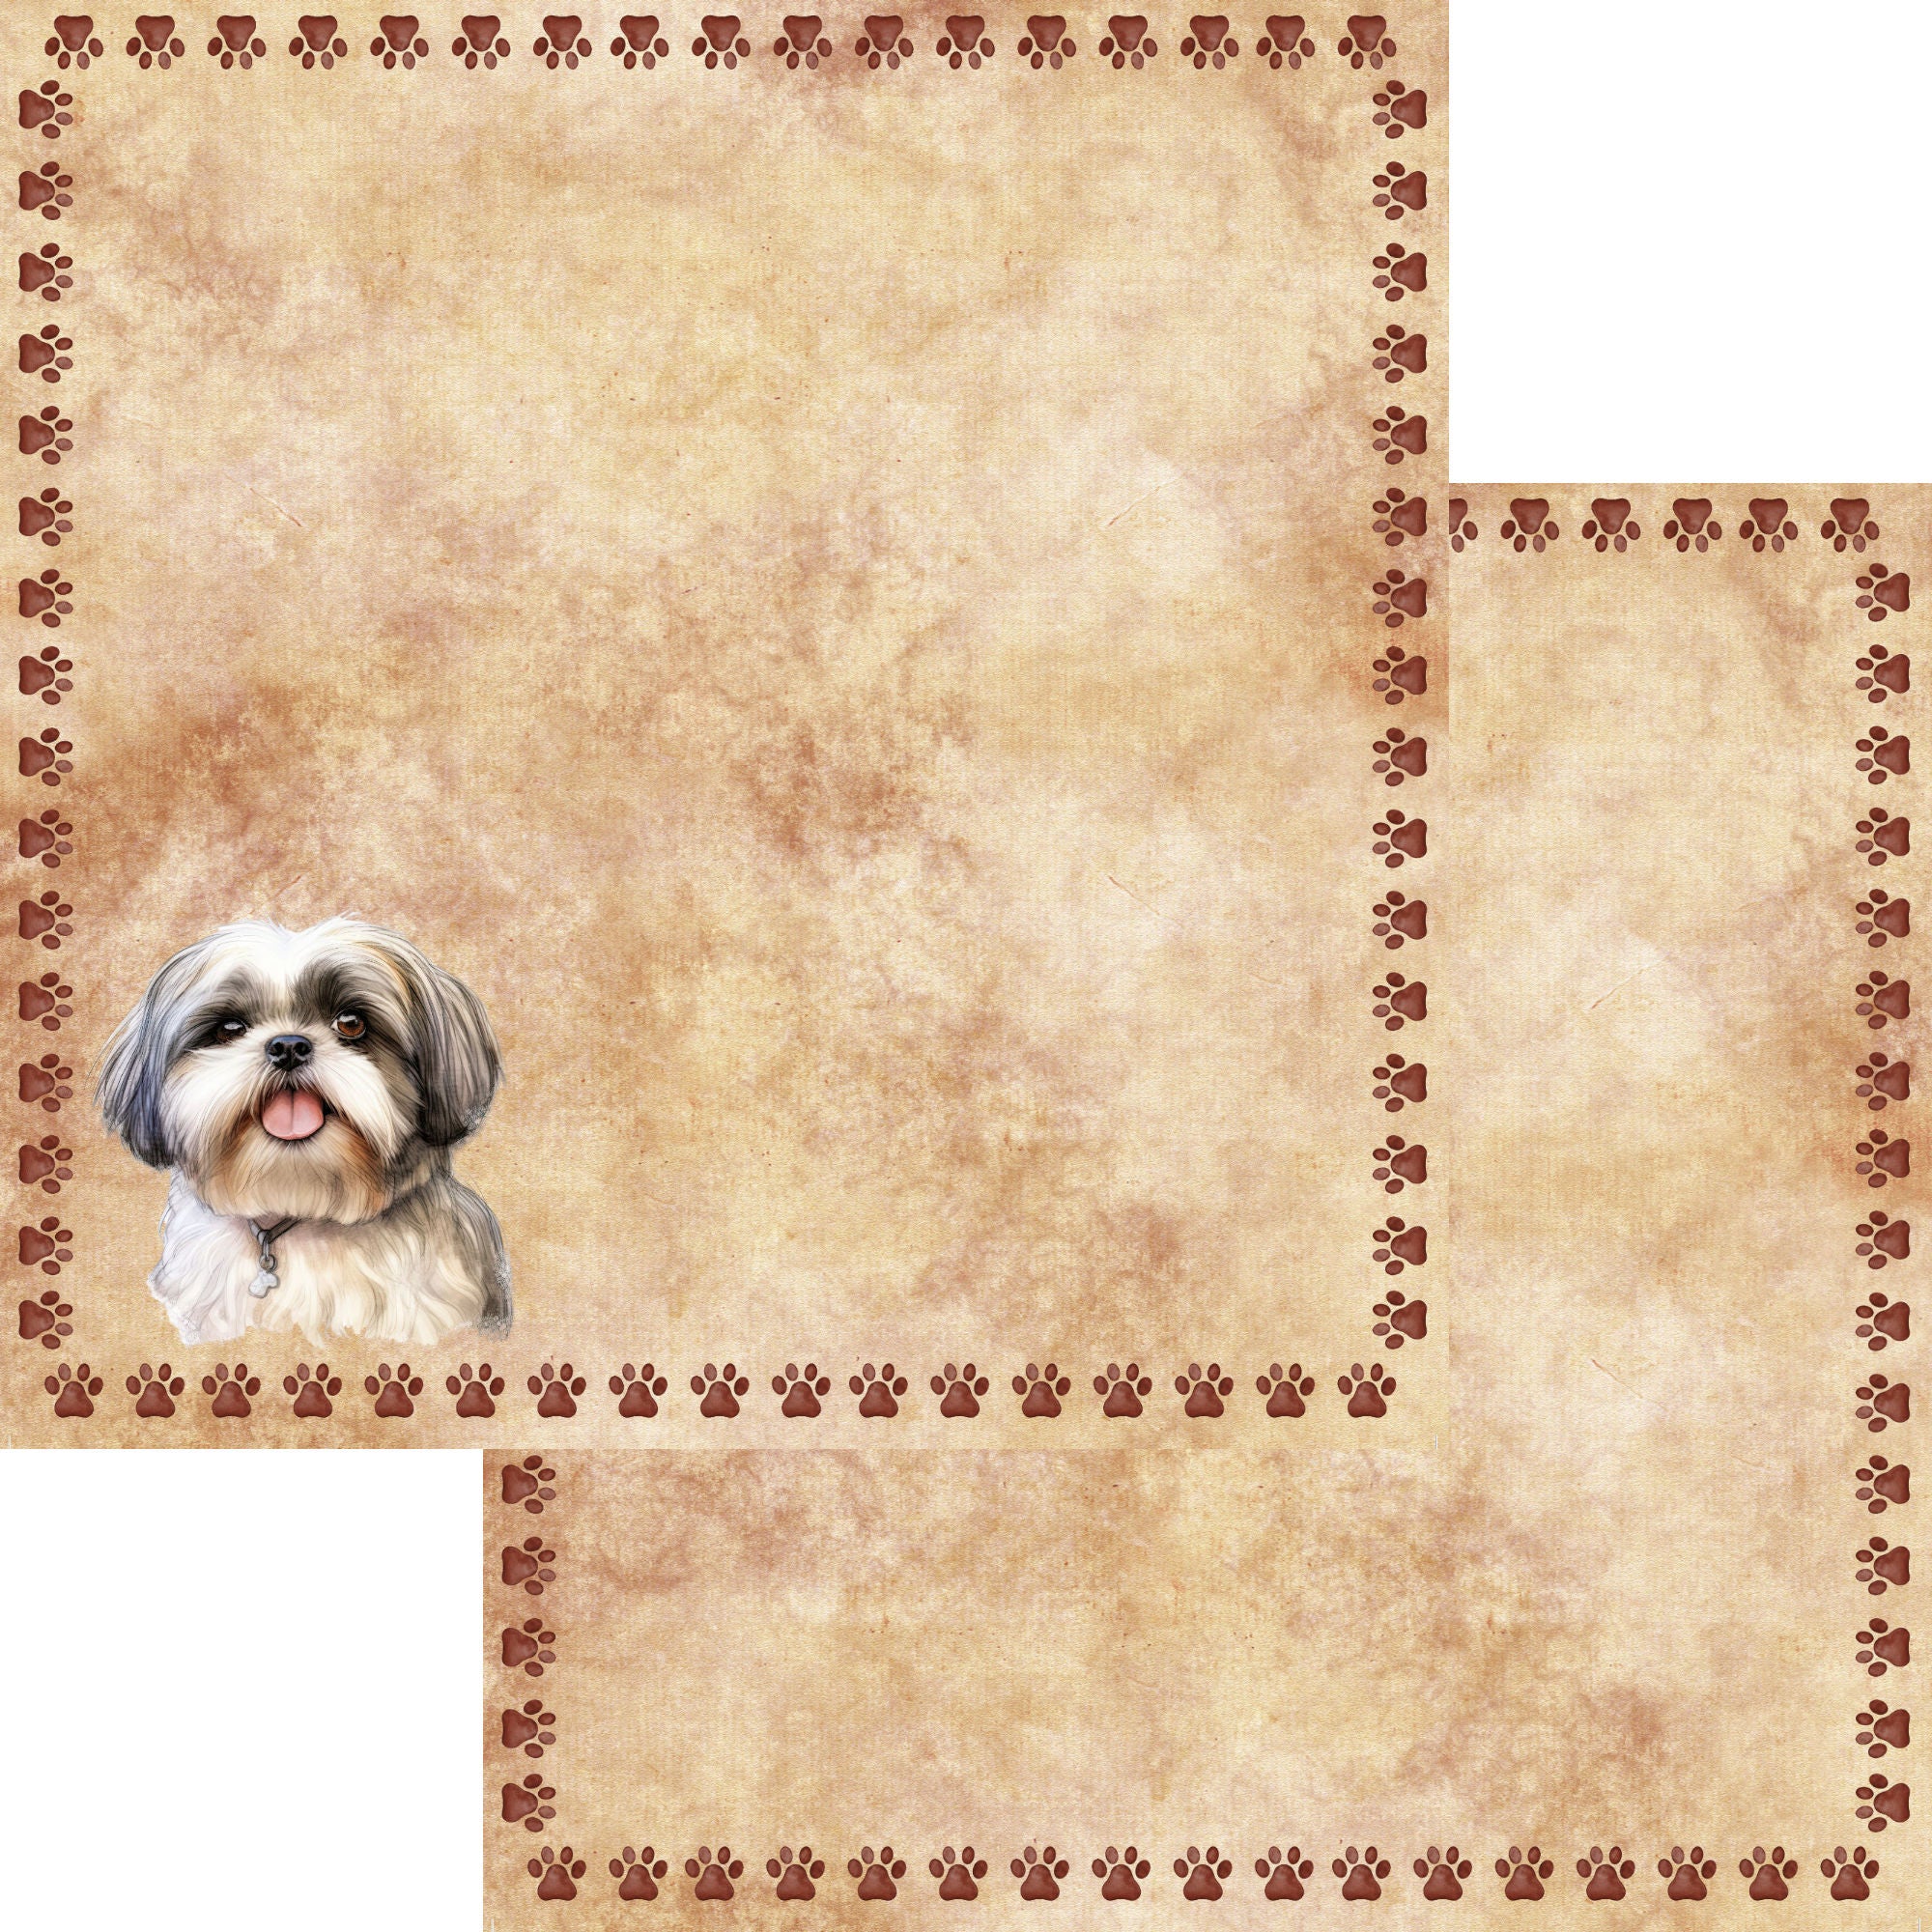 Dog Breeds Collection Shih Tzu 12 x 12 Double-Sided Scrapbook Paper by SSC Designs